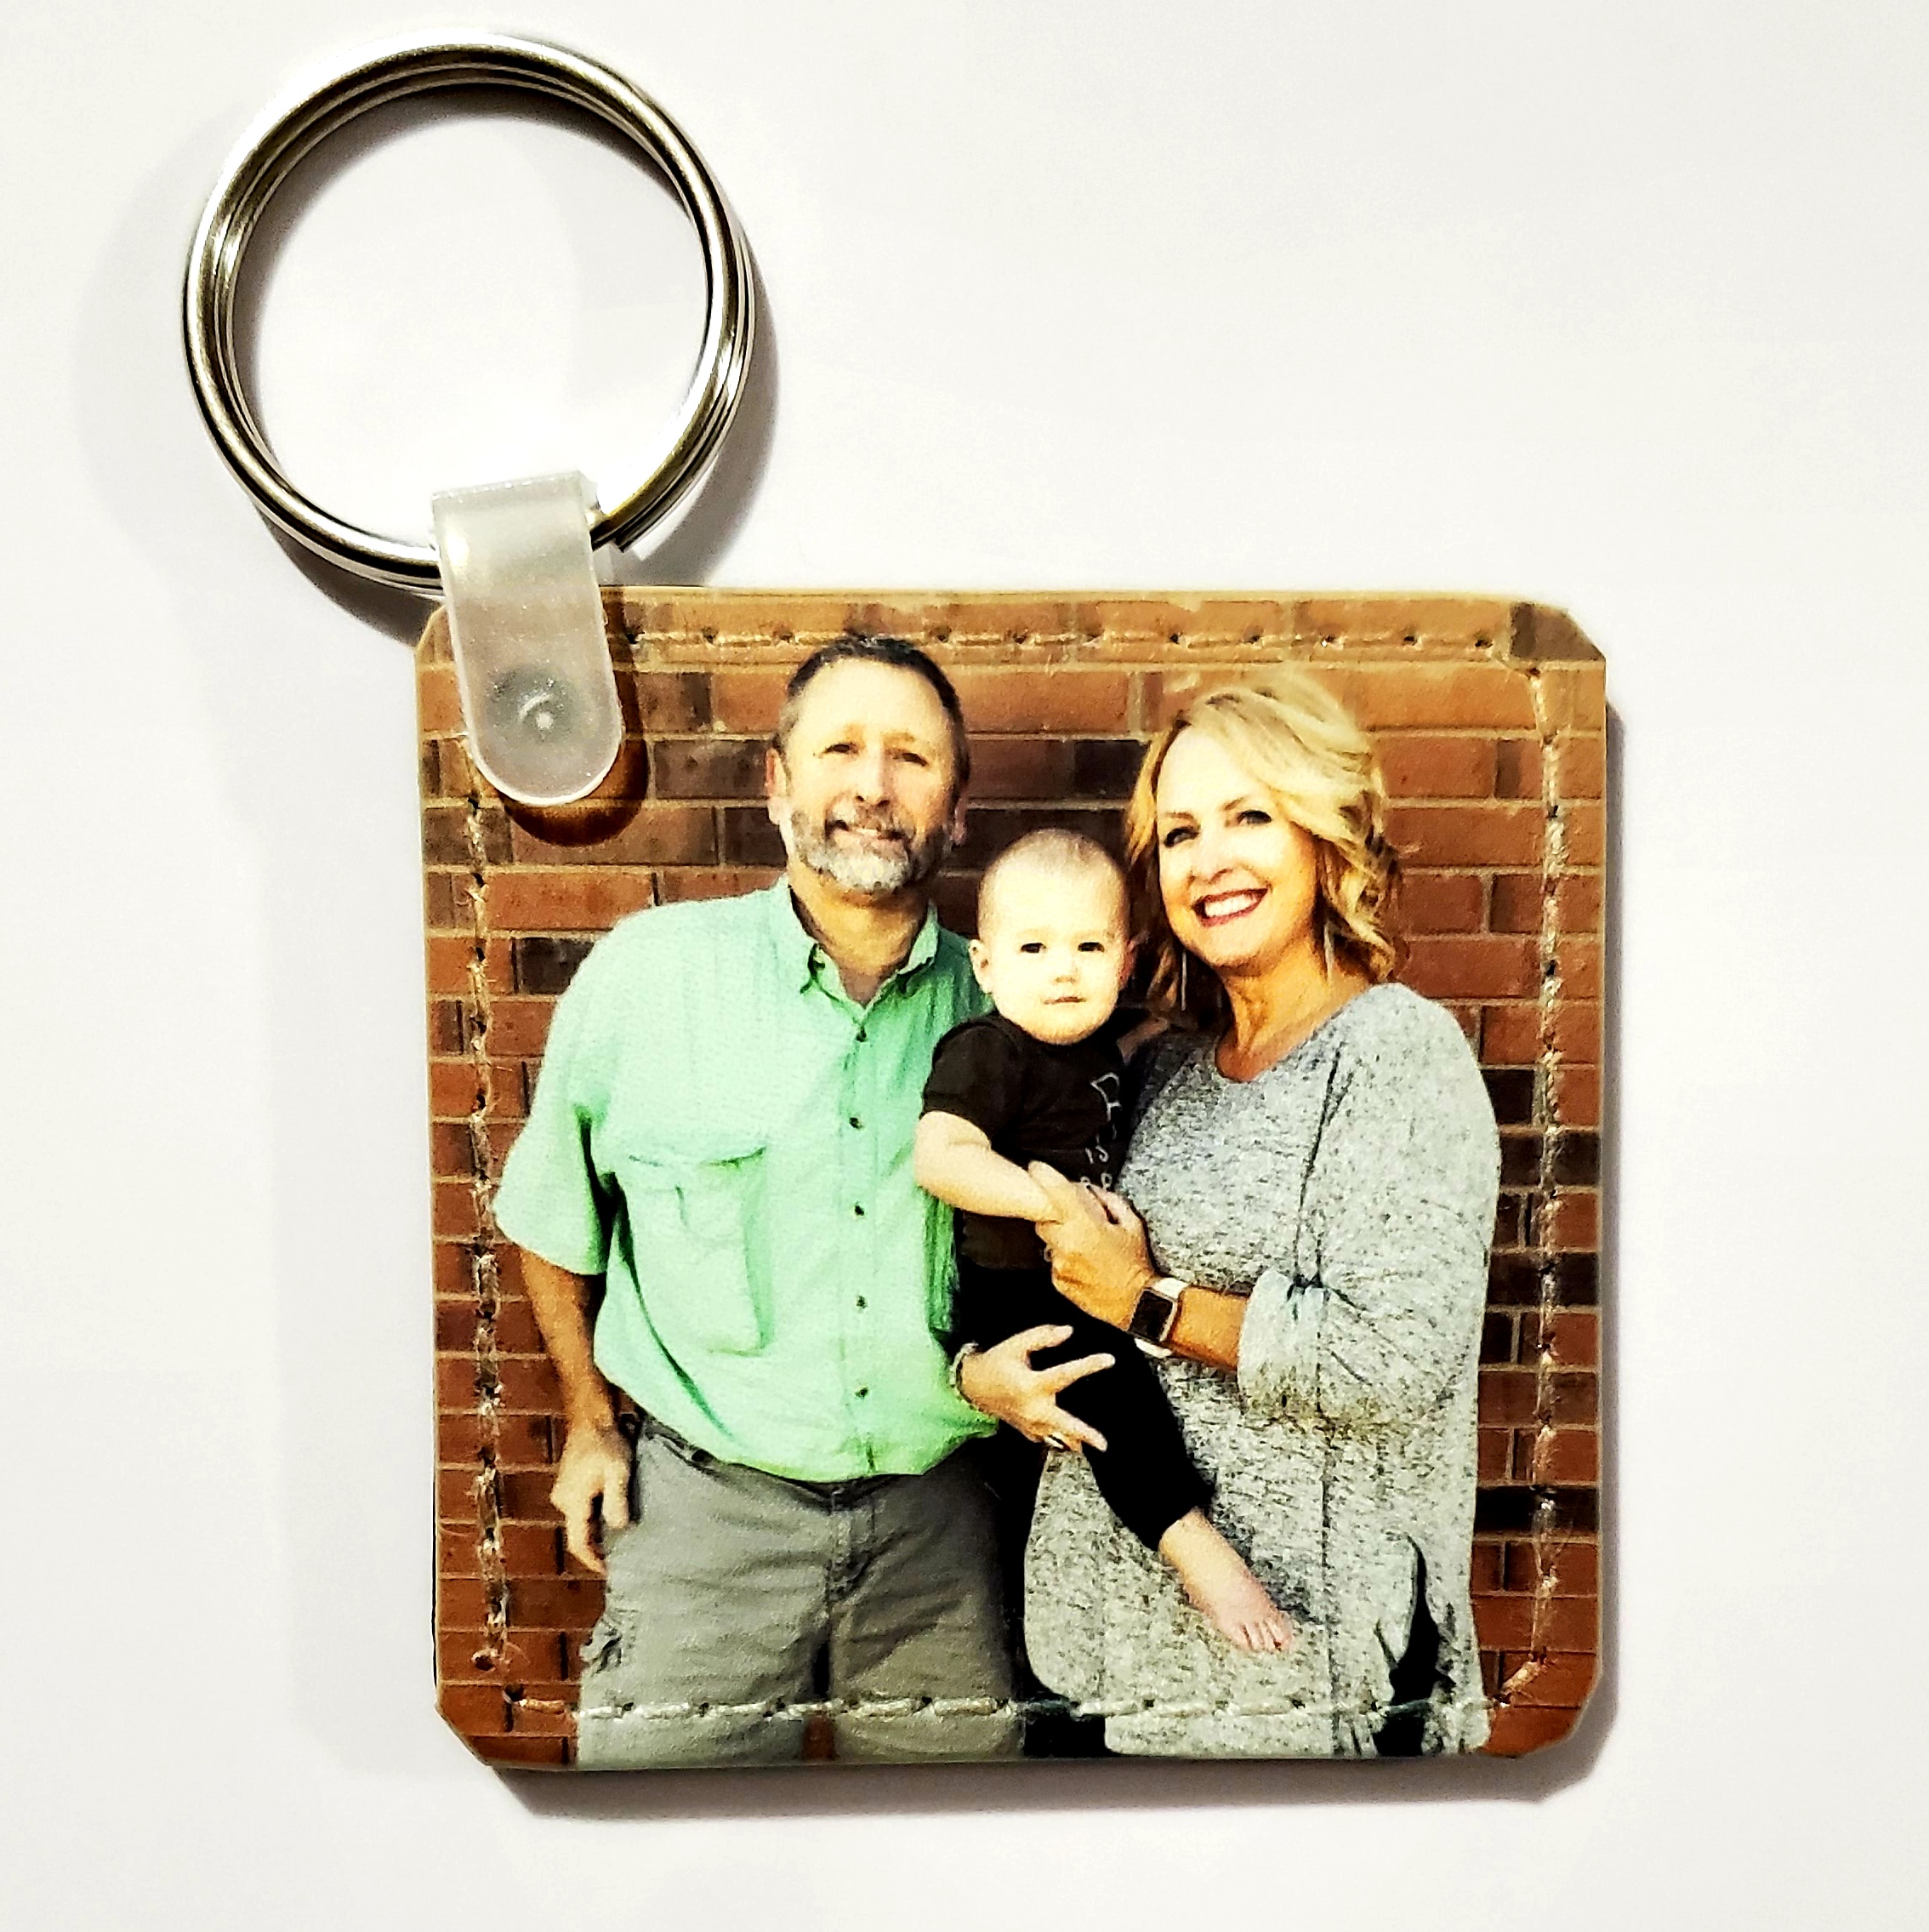 Leather Photo Key Chain made with sublimation printing